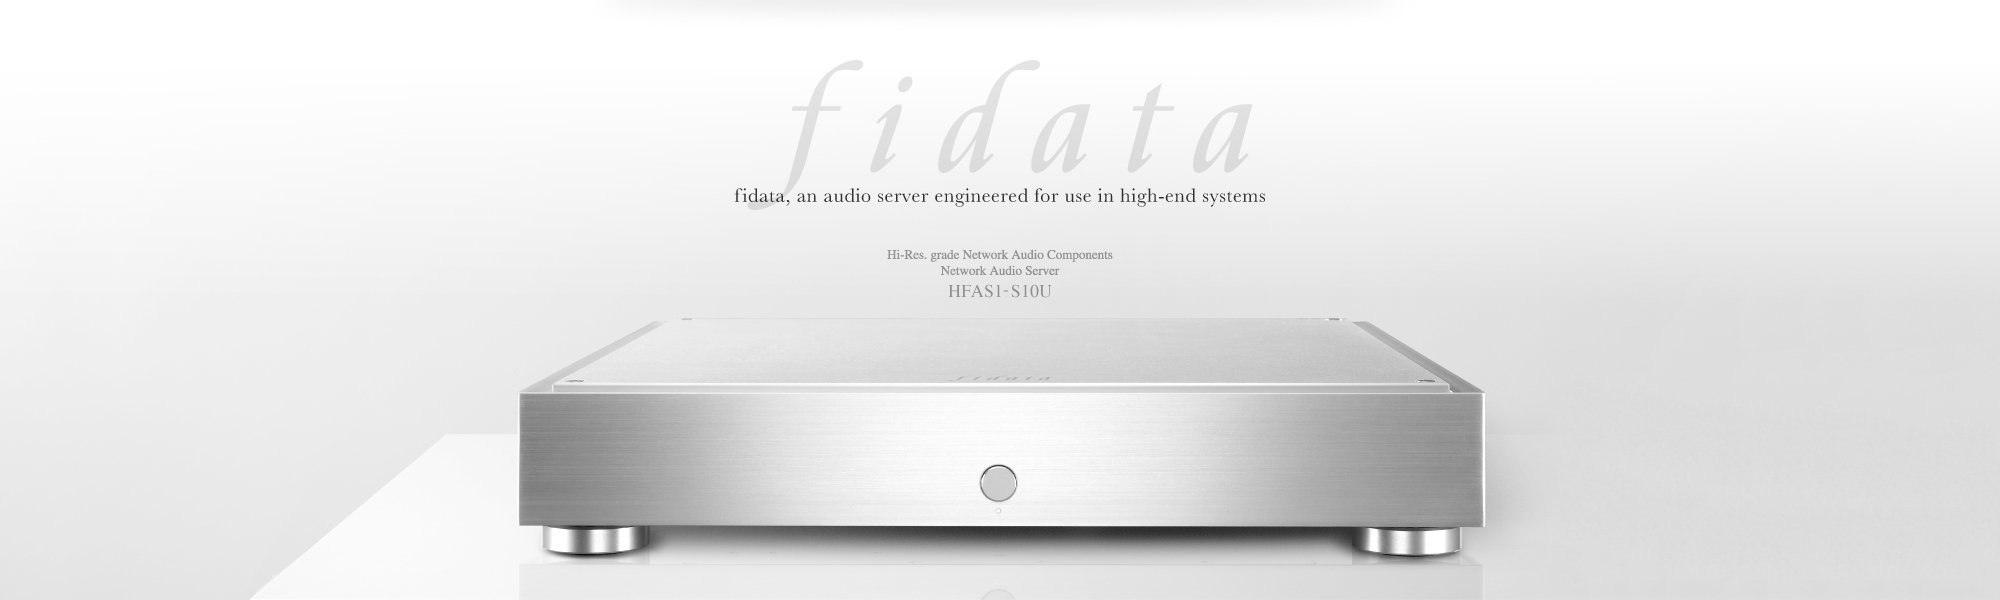 fidata, an audio server engineered for use in high-end systems